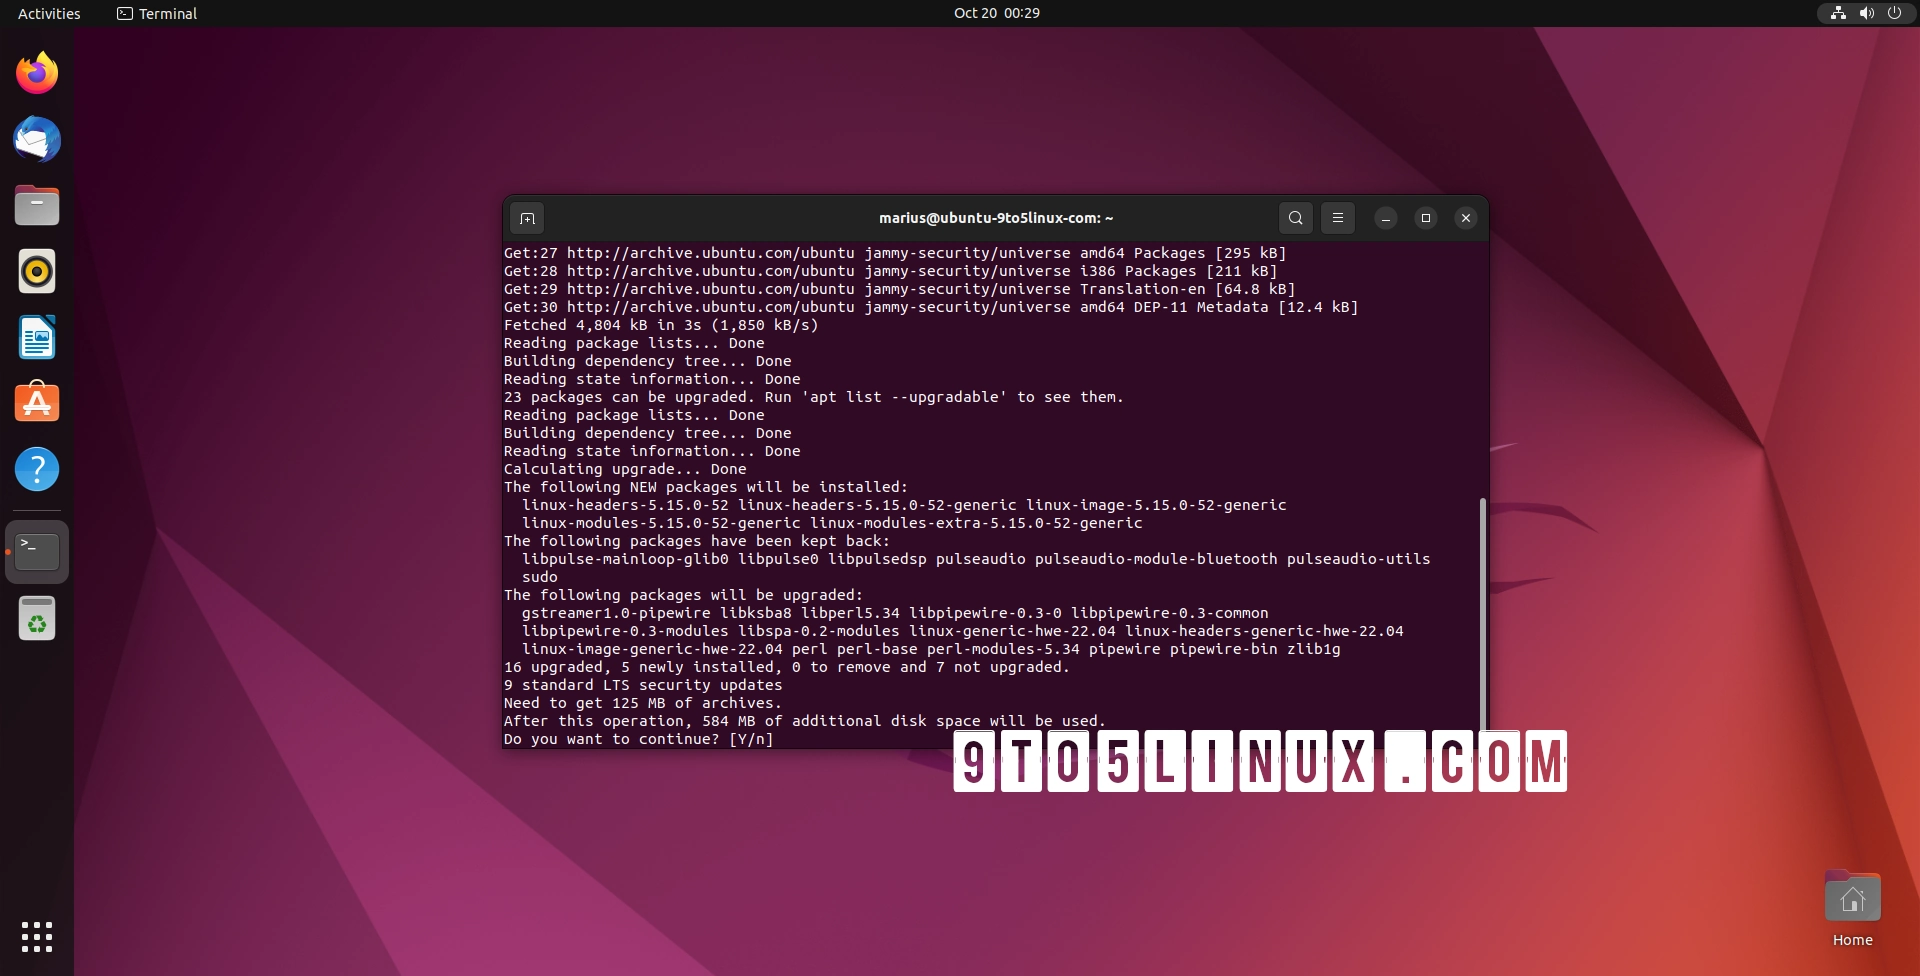 Debian and Ubuntu Users Get Kernel Security Updates to Fix Recent Wi-Fi Stack Flaws